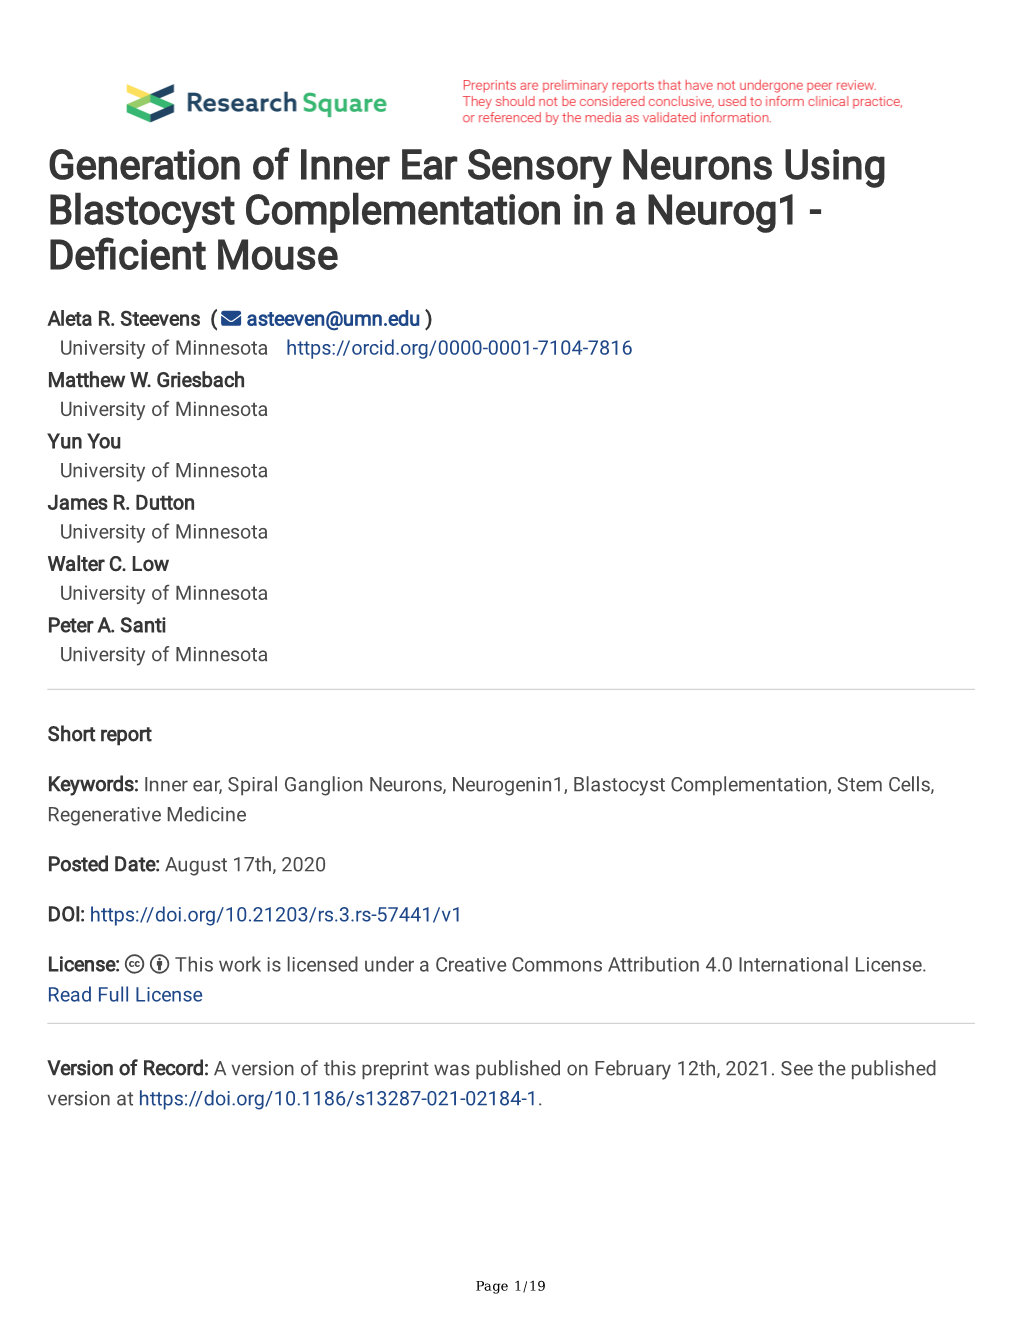 Generation of Inner Ear Sensory Neurons Using Blastocyst Complementation in a Neurog1 - Defcient Mouse